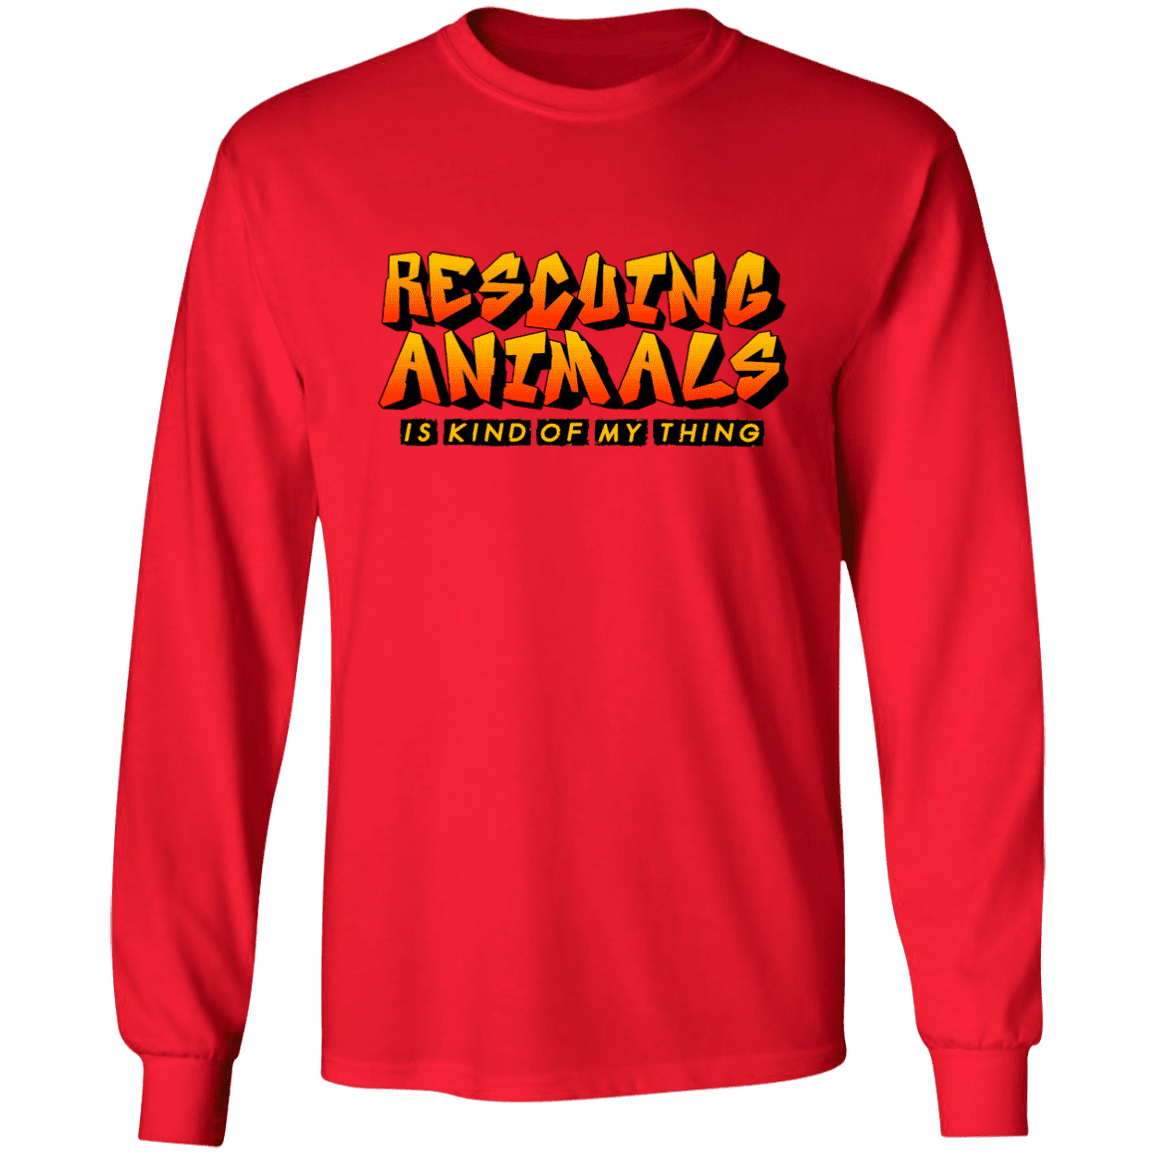 Rescuing Animals Is My Kind Of Thing - Long Sleeve T Shirt.